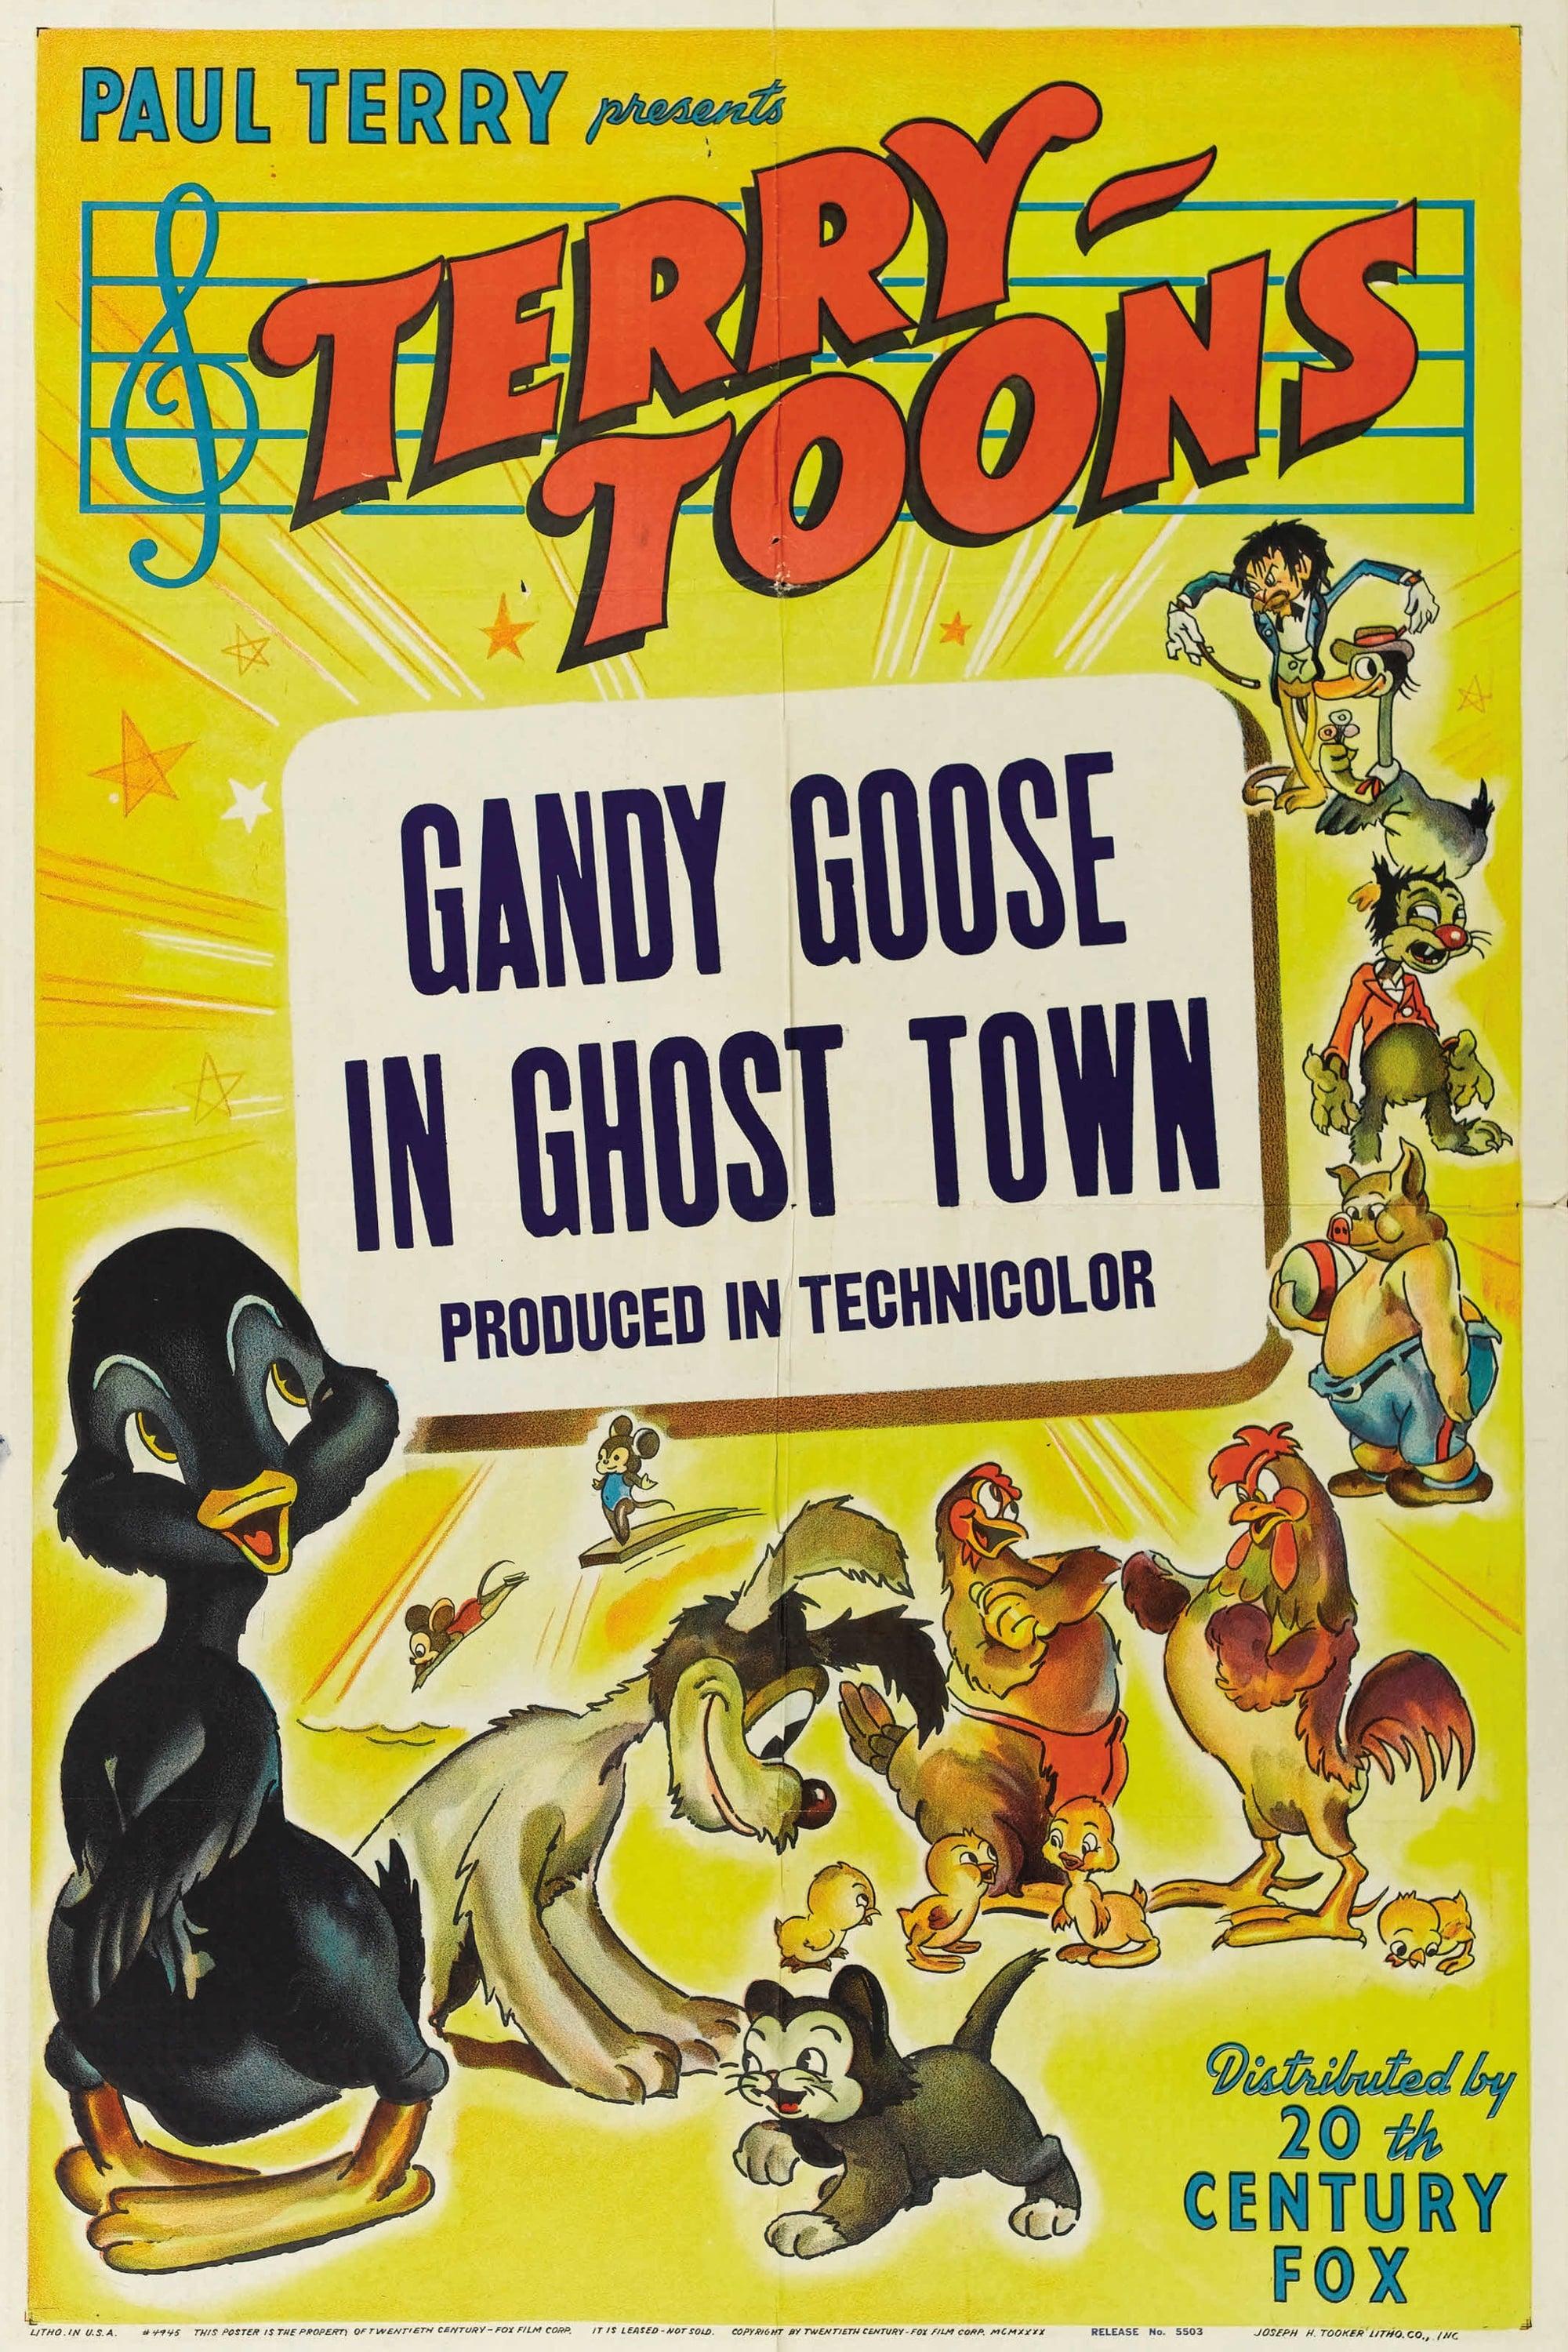 The Ghost Town poster